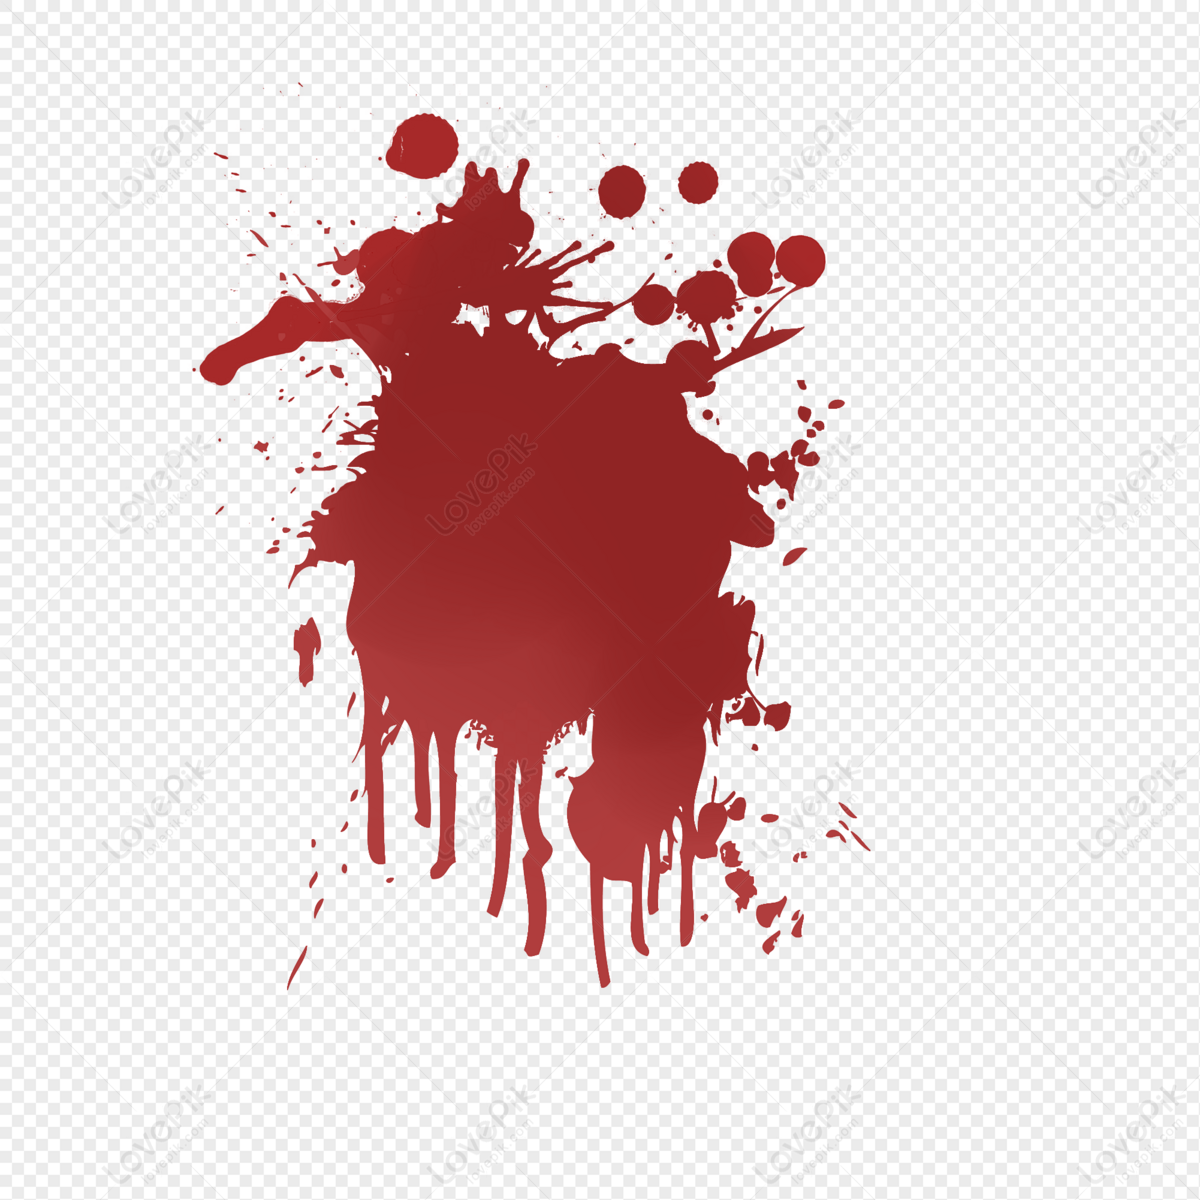 Bloodstains Images, HD Pictures For Free Vectors & PSD Download -  